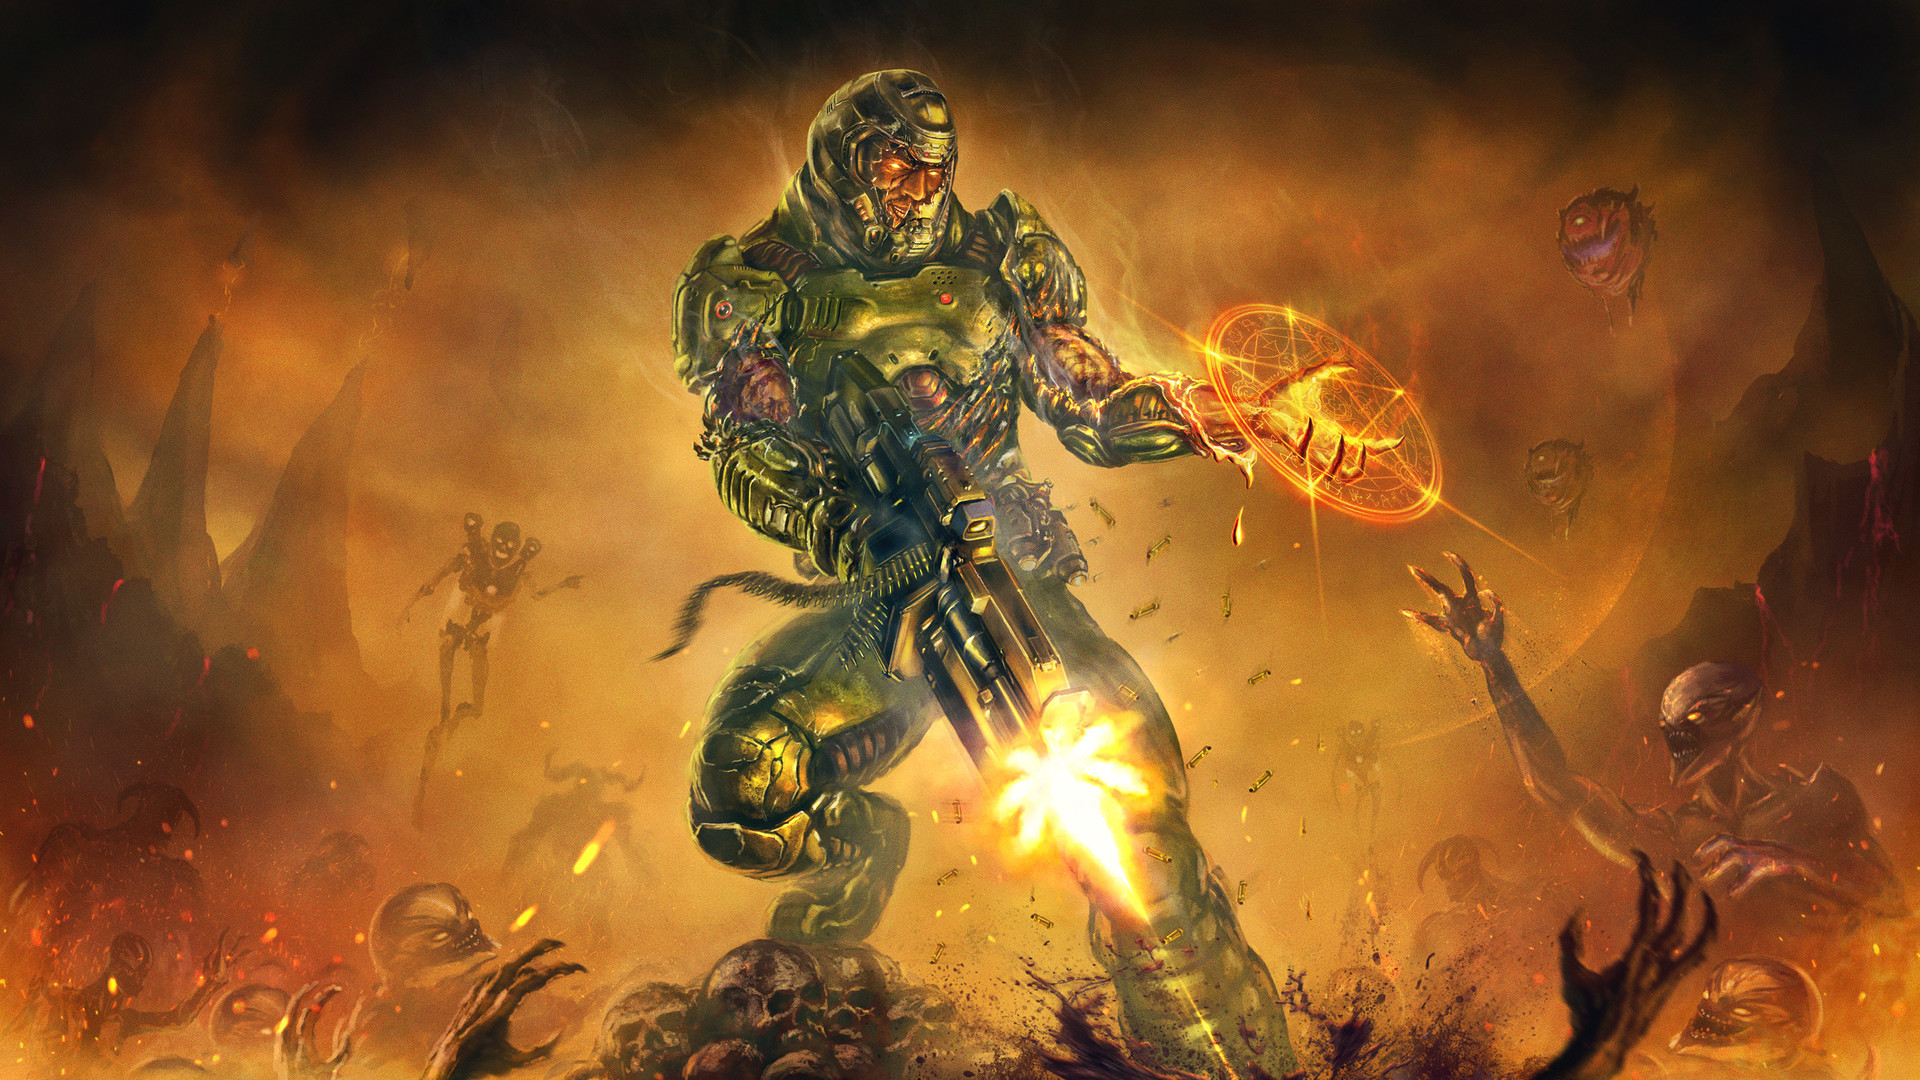 doom wallpaper,action adventure game,cg artwork,fictional character,mythology,strategy video game